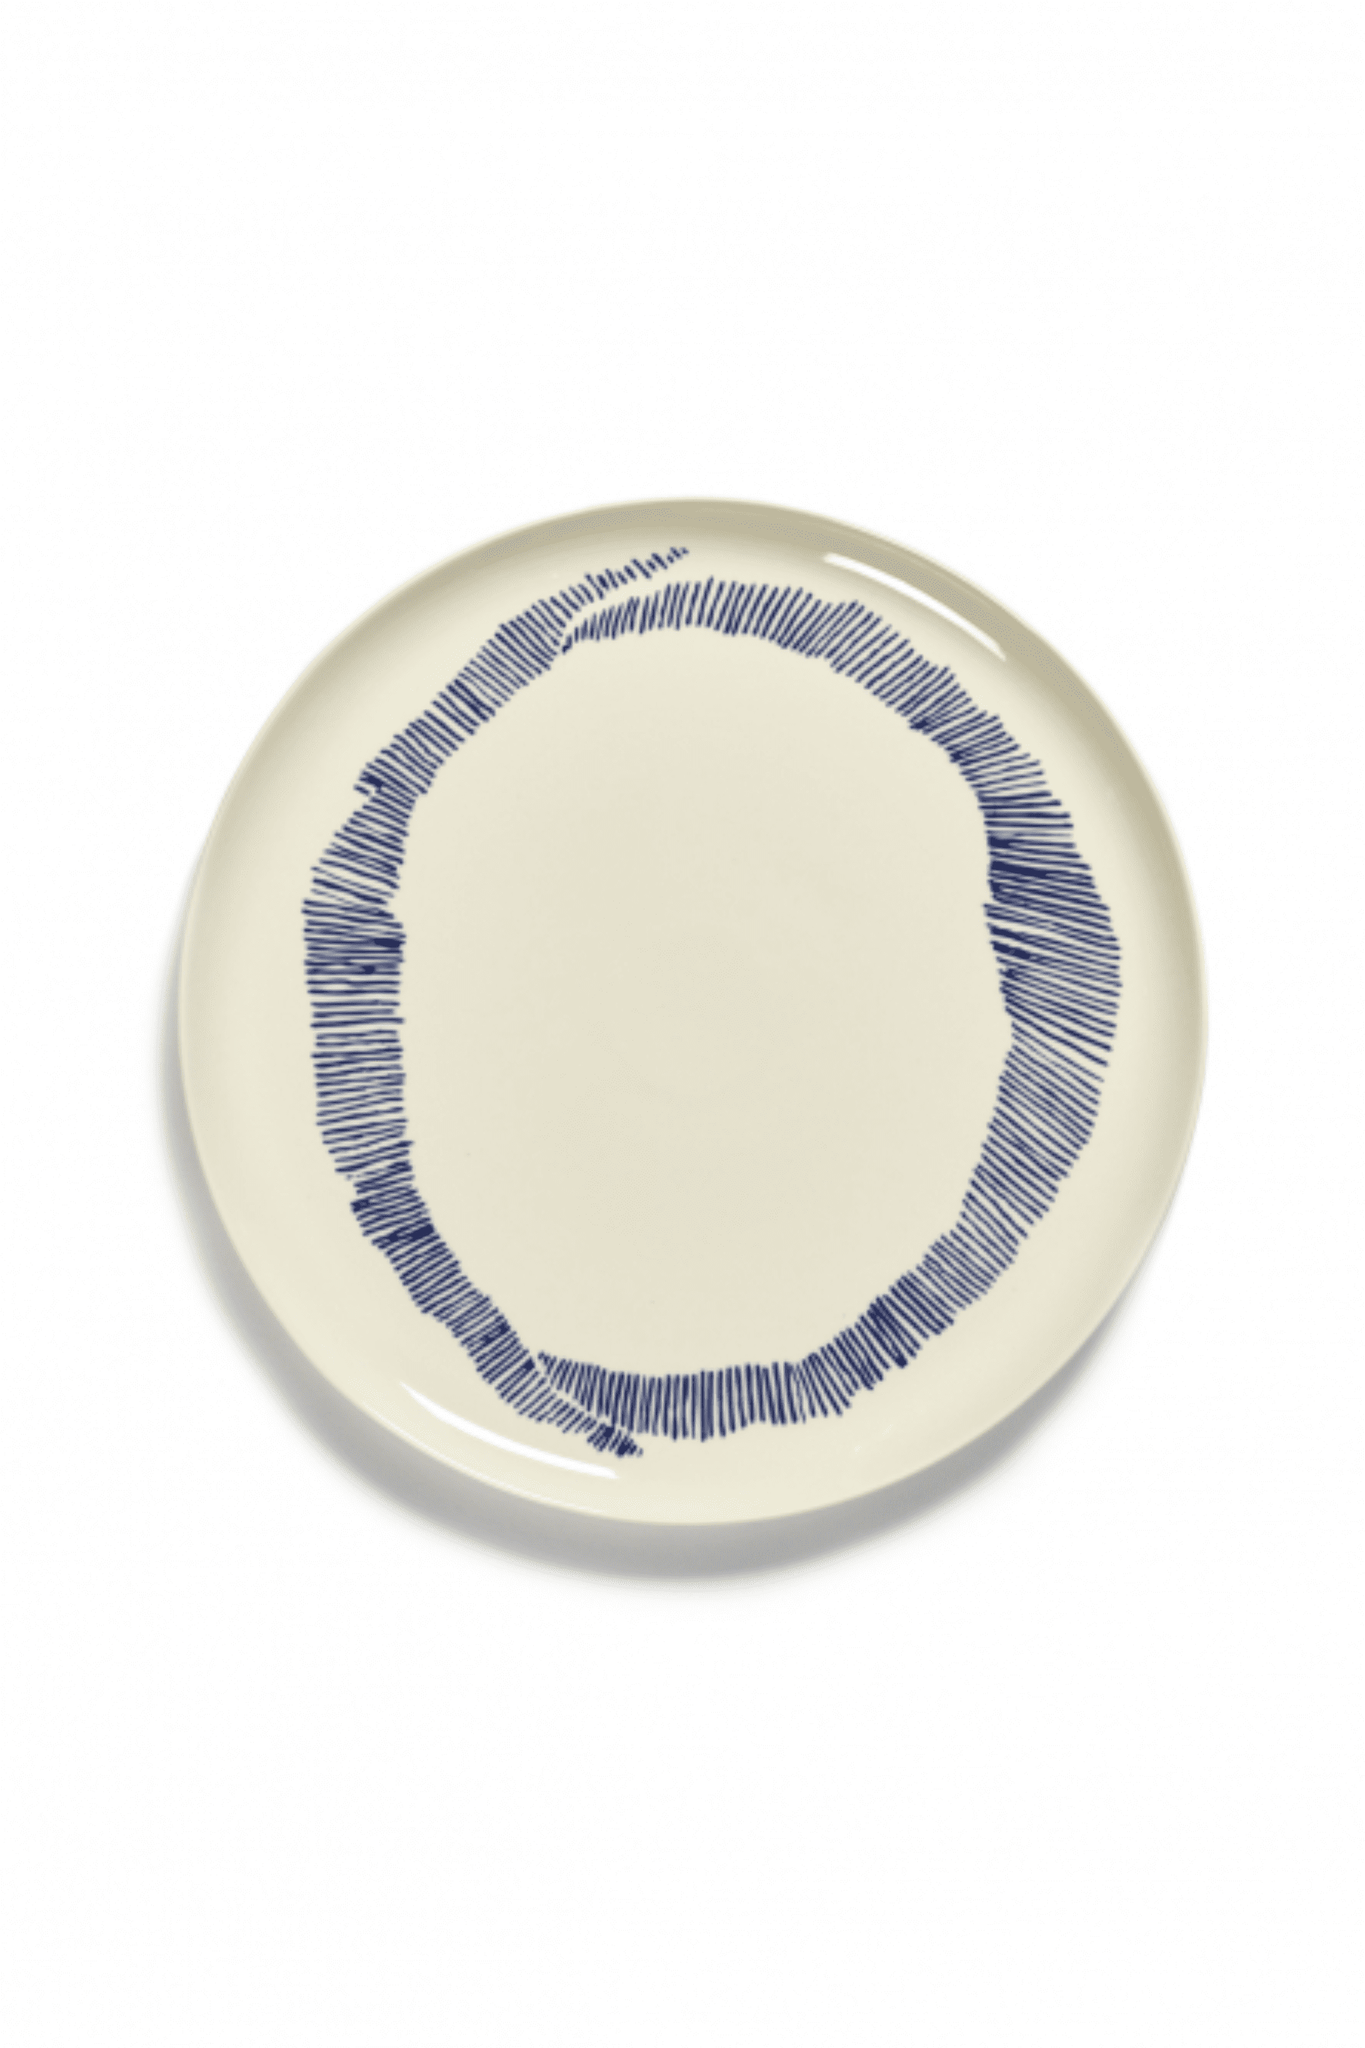 Serving Plate, White Swirl with Blue Stripes Ottolenghi Serax, top view